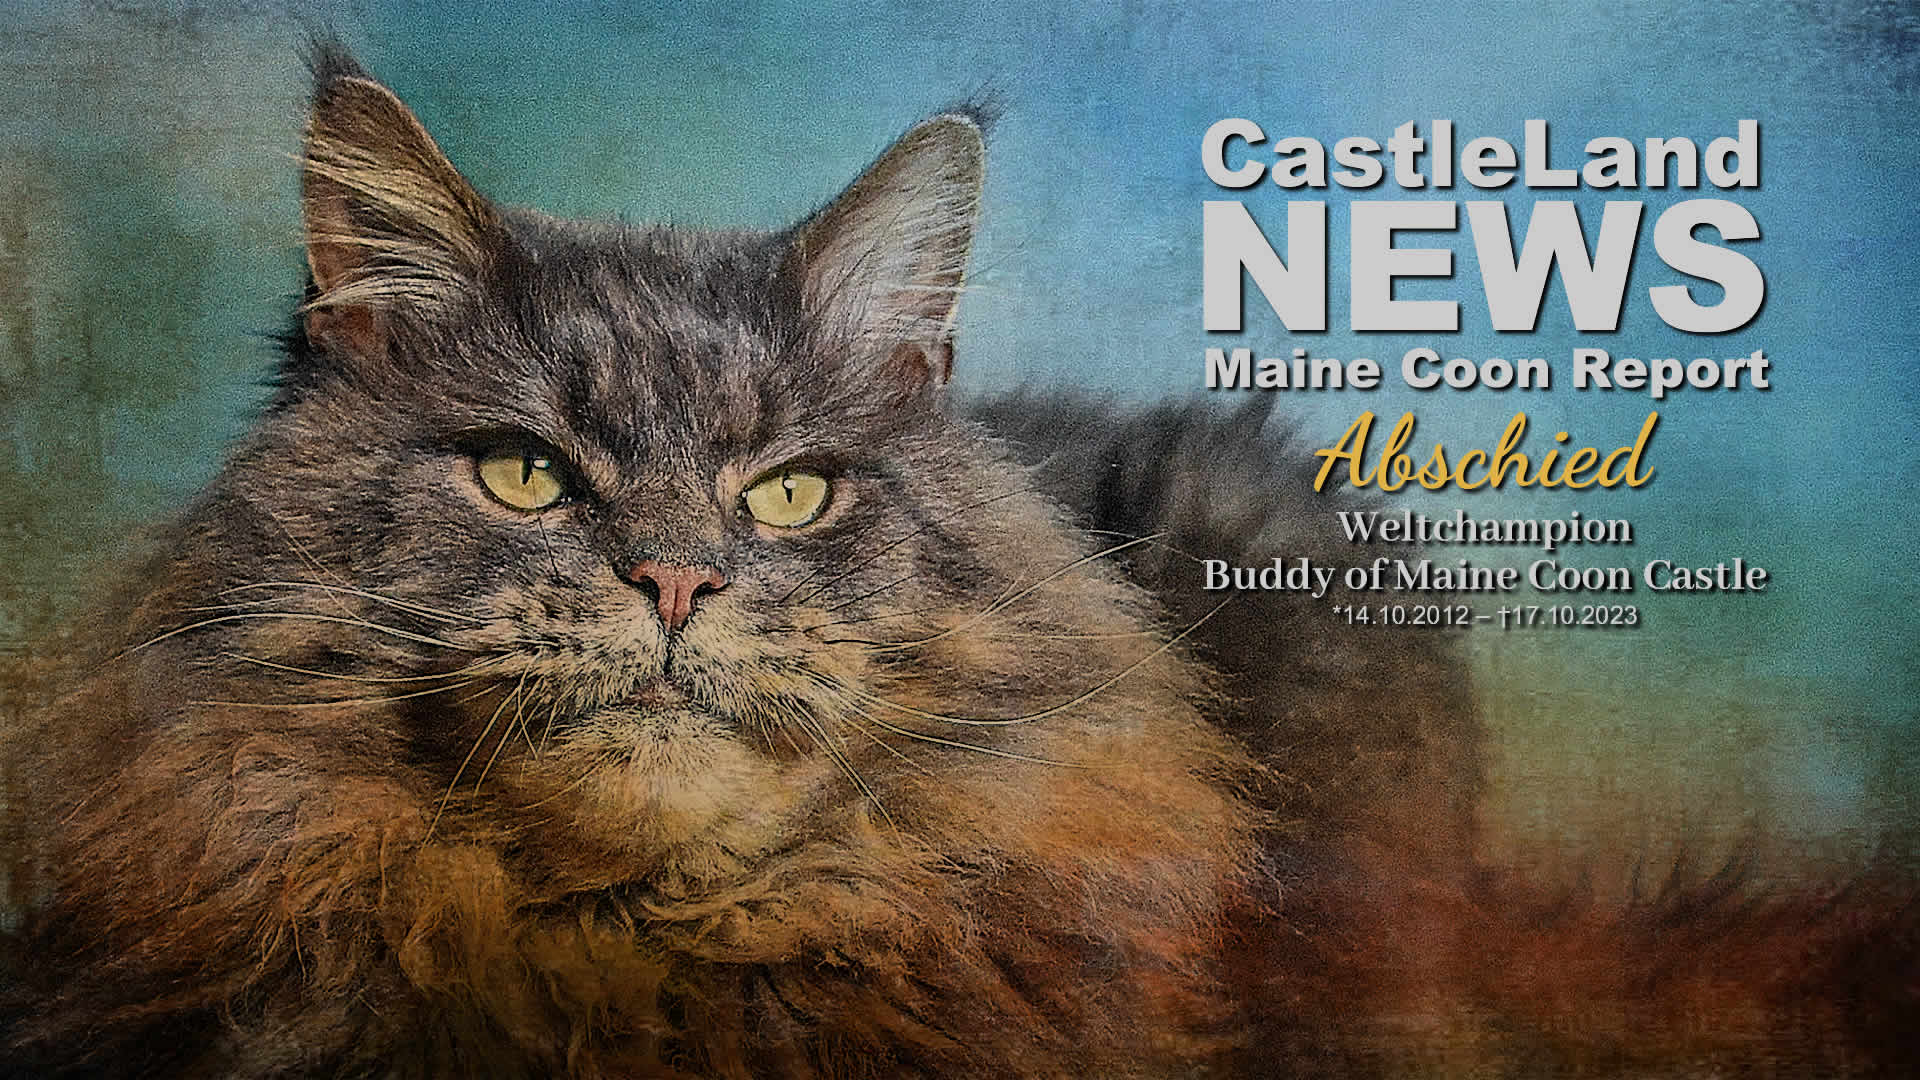 Maine Coon Report - Abschied Buddy of Maine Coon Castle im Katzenblog